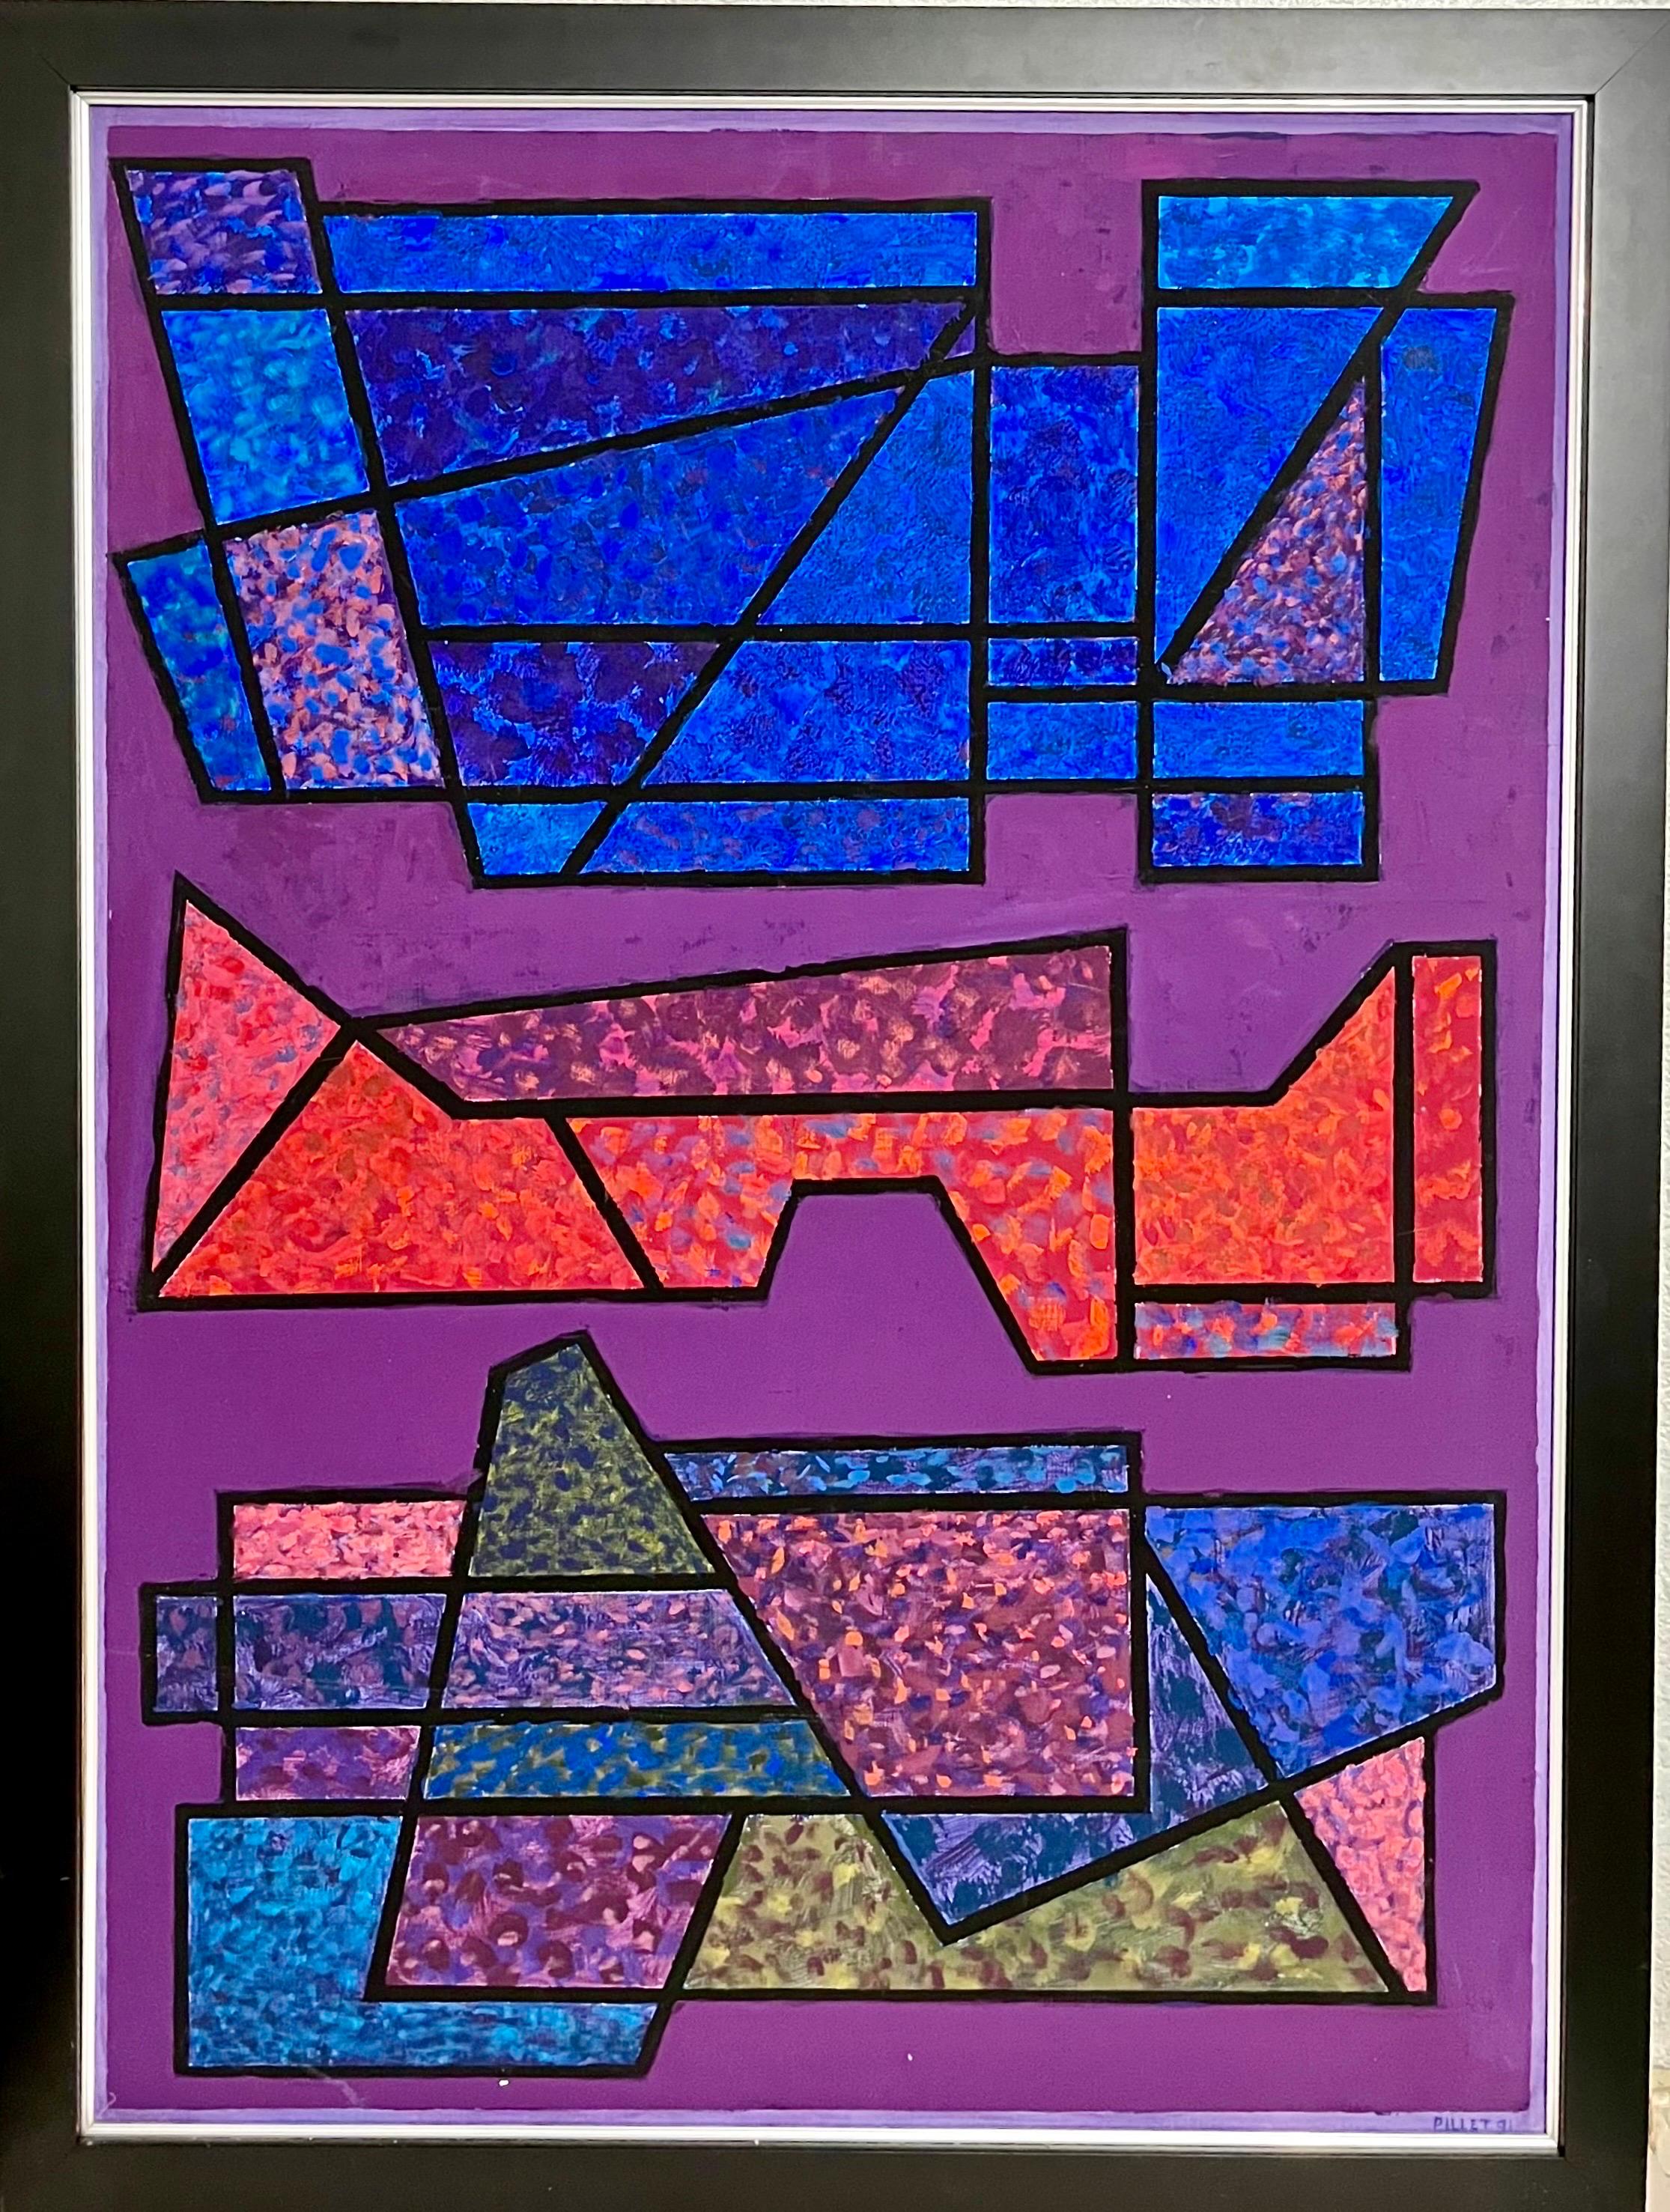 Edgard Pillet (French, 1912-1996). 
Modern Abstract oil painting on canvas. 
Titled "Olifant". A vibrant work featuring colors of purple, pinks and blues. Hand signed and dated 1991 lower right. 
Hand inscribed artist name, title and dated '91 on